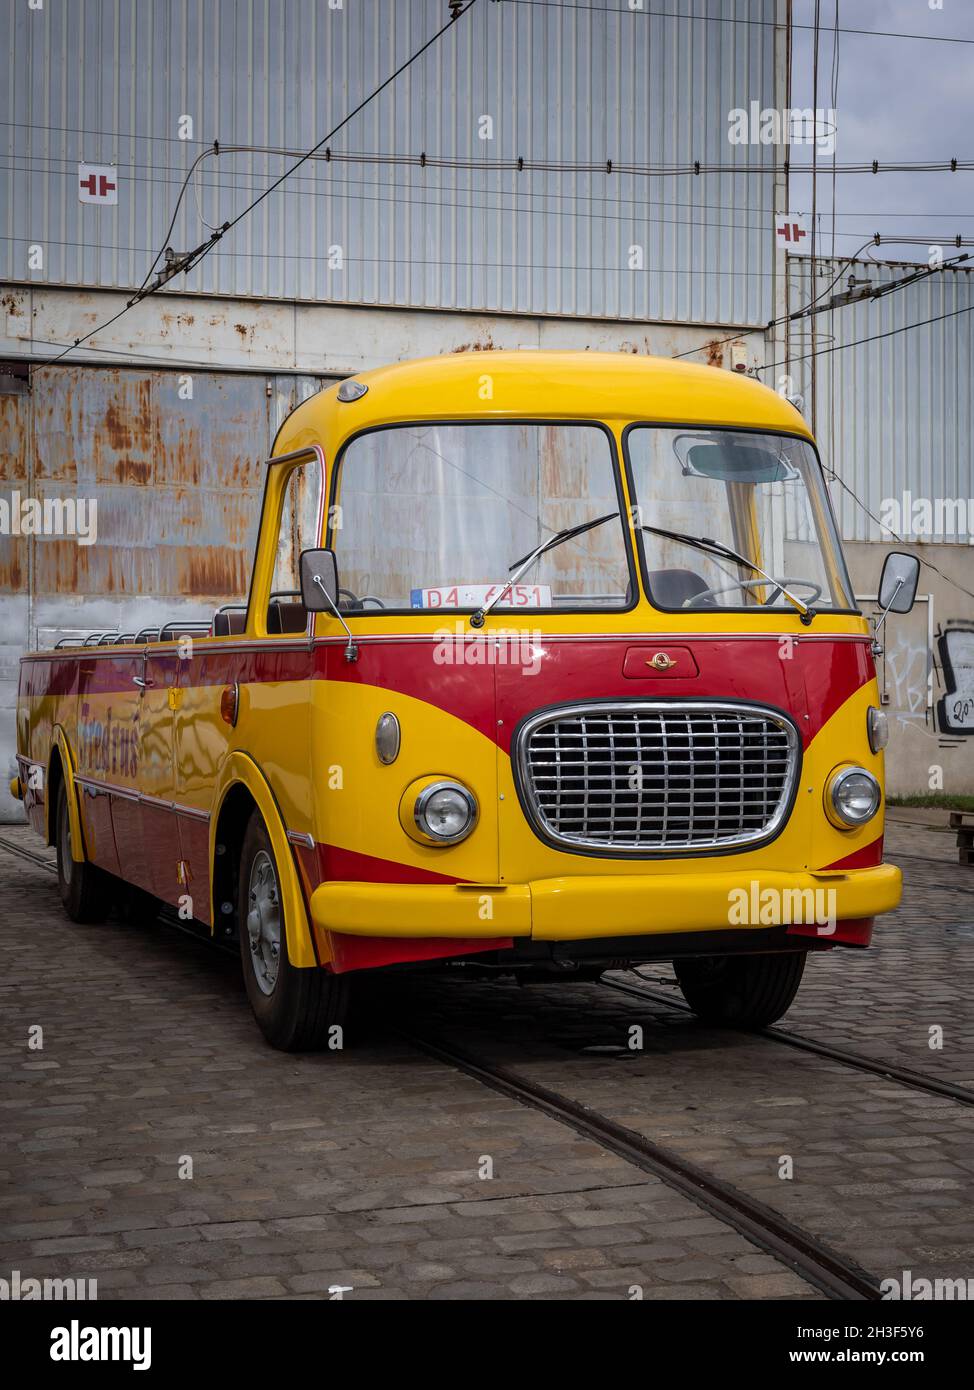 Wroclaw, Poland - September 19, 2021: An empty, retro cabrio Skoda bus in front of the depot. Stock Photo